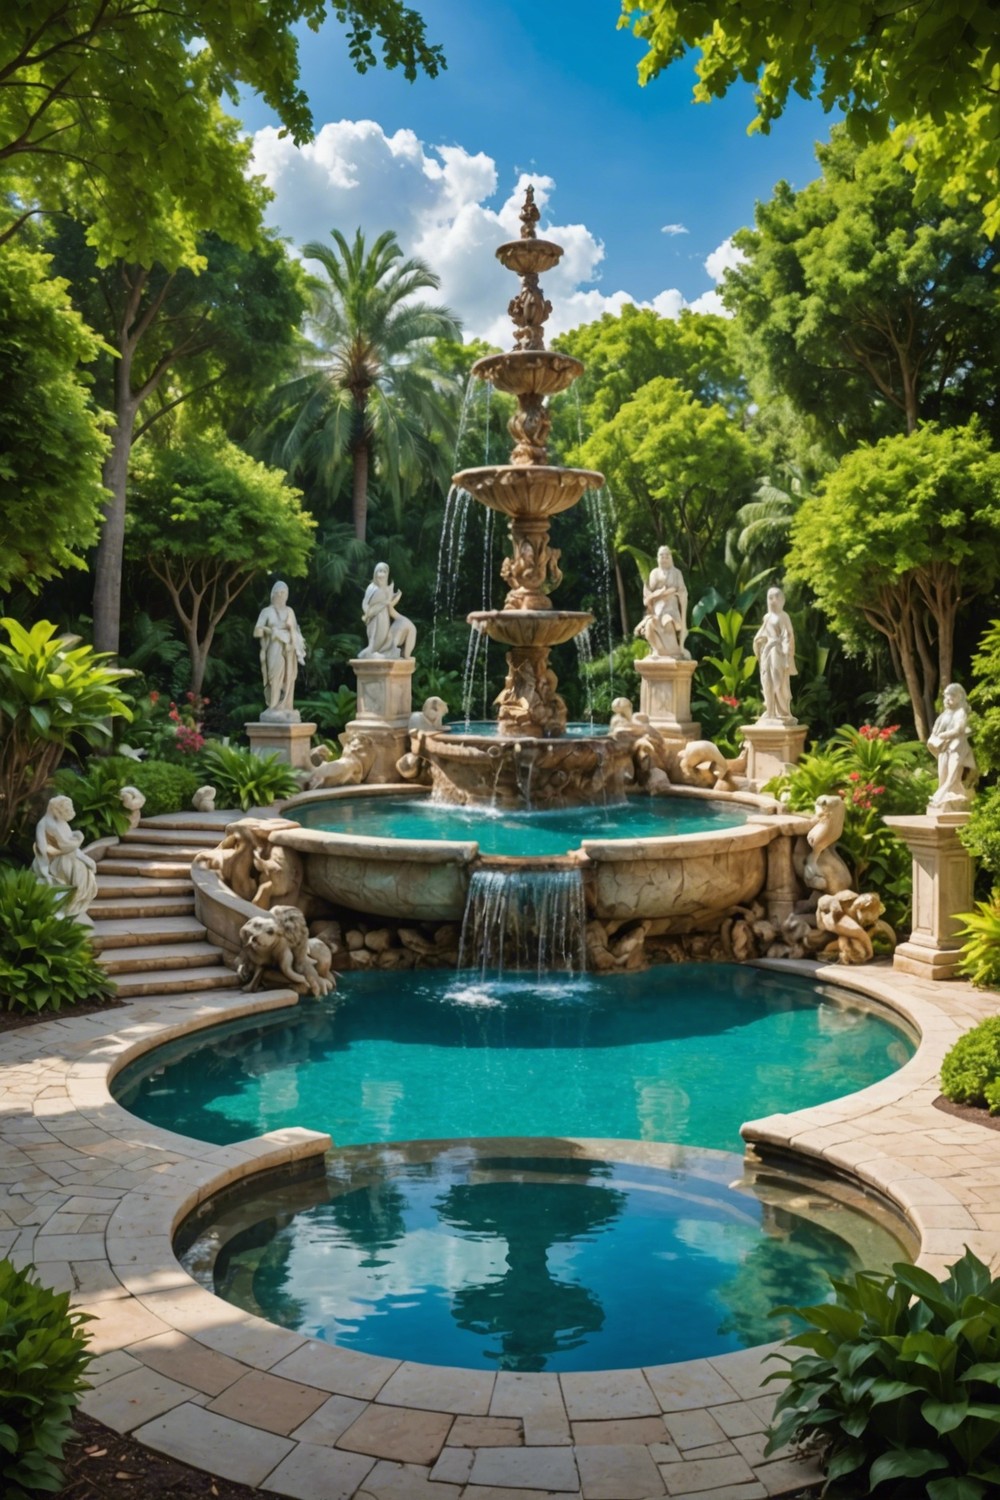 Raised Pool with Fountains and Statues